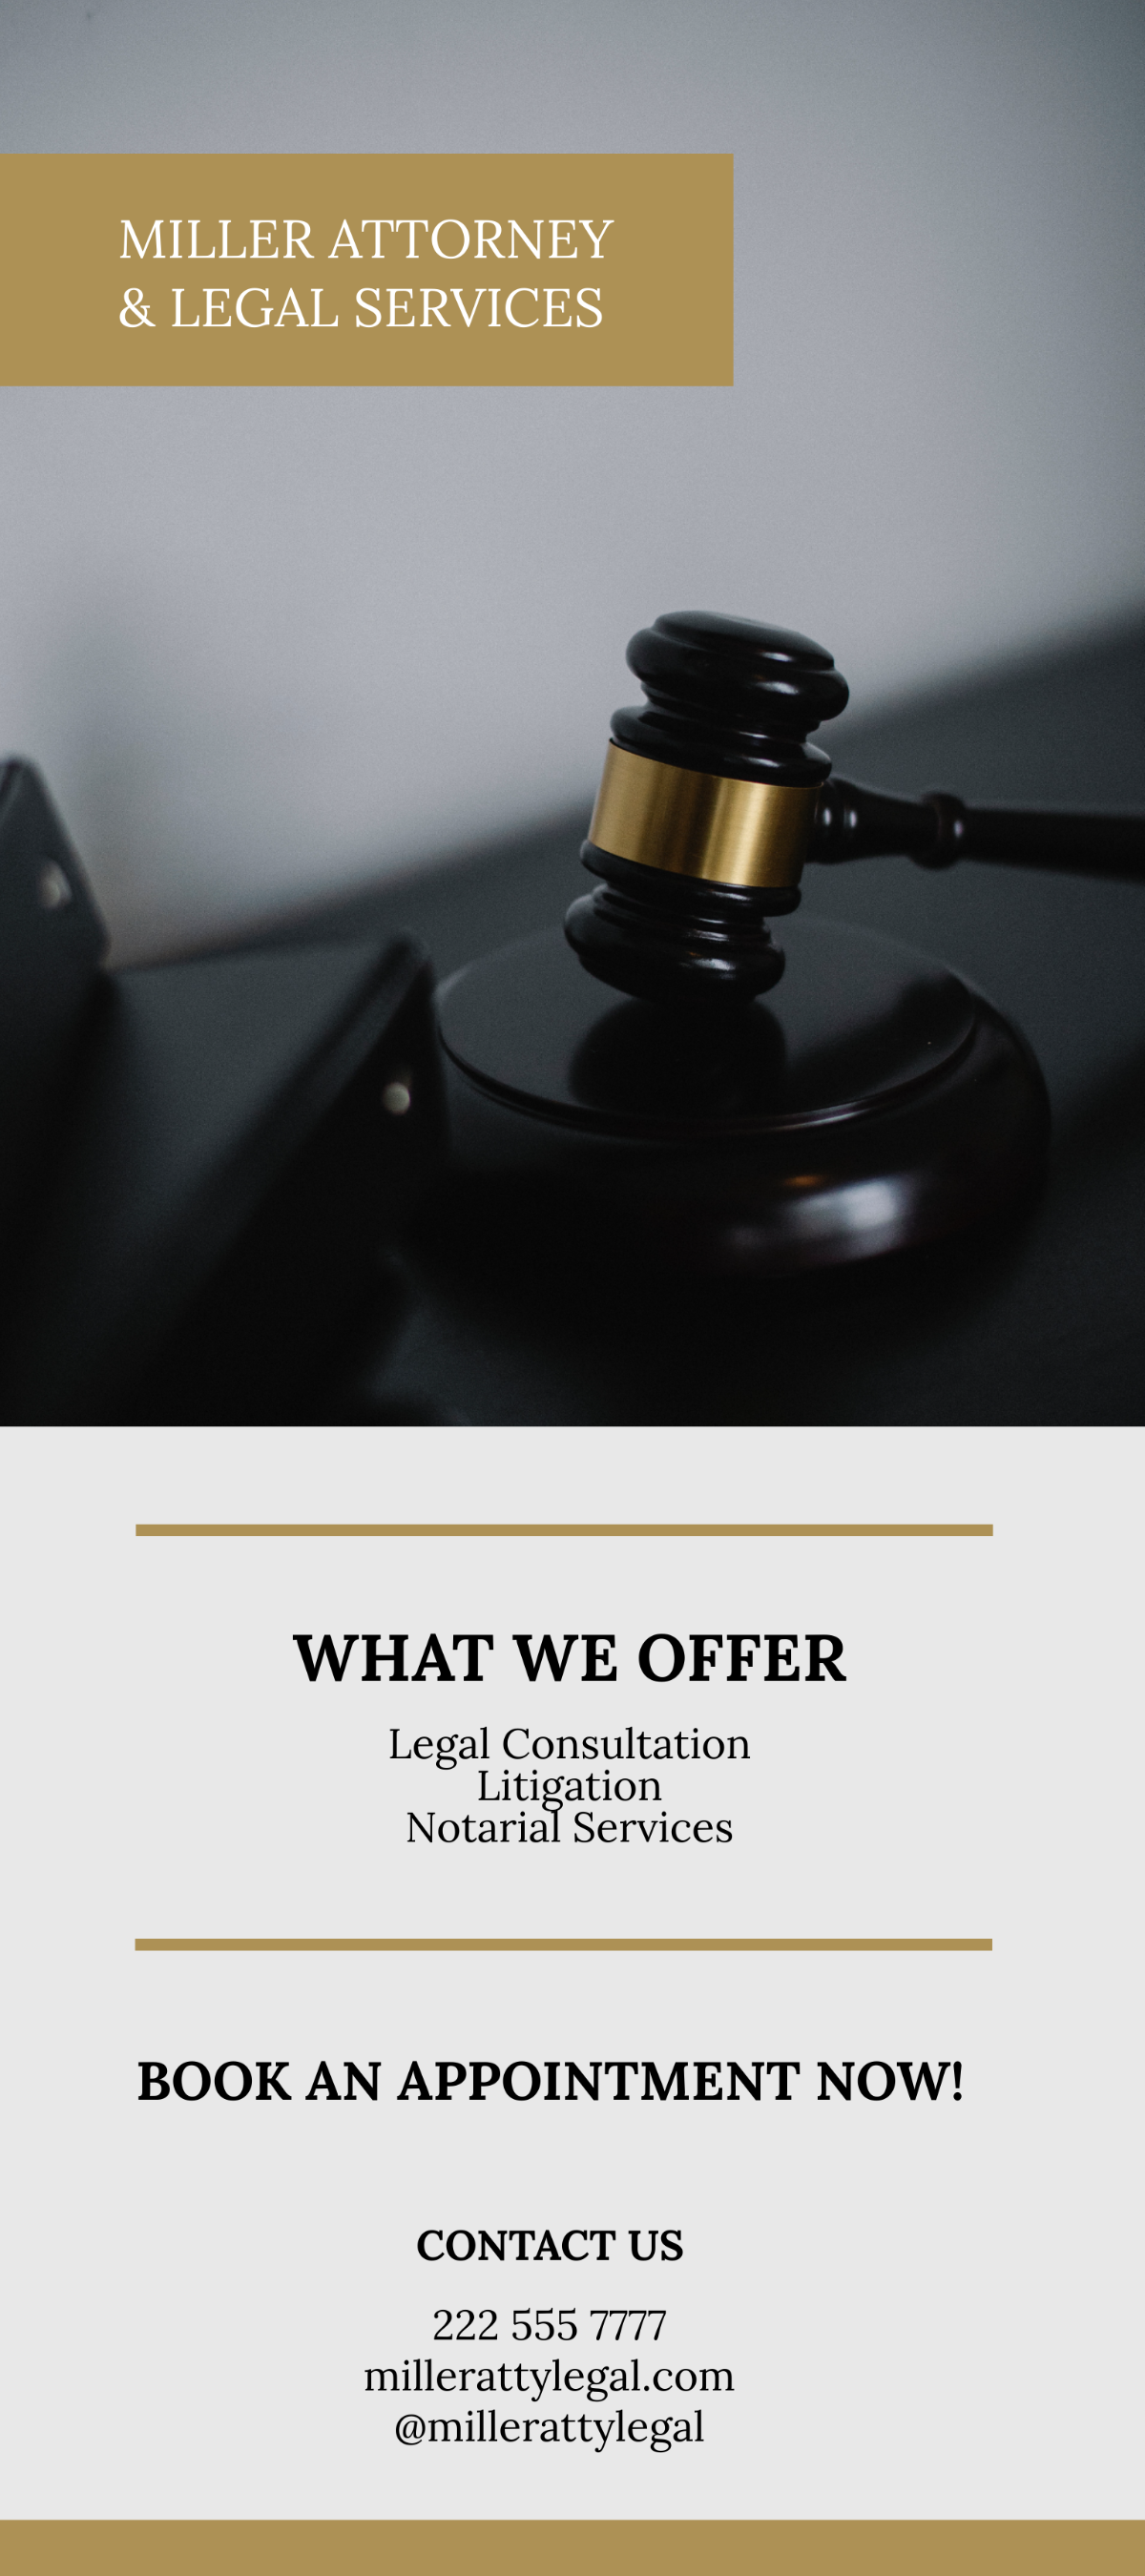 Attorney & Legal Services Rack Card Template